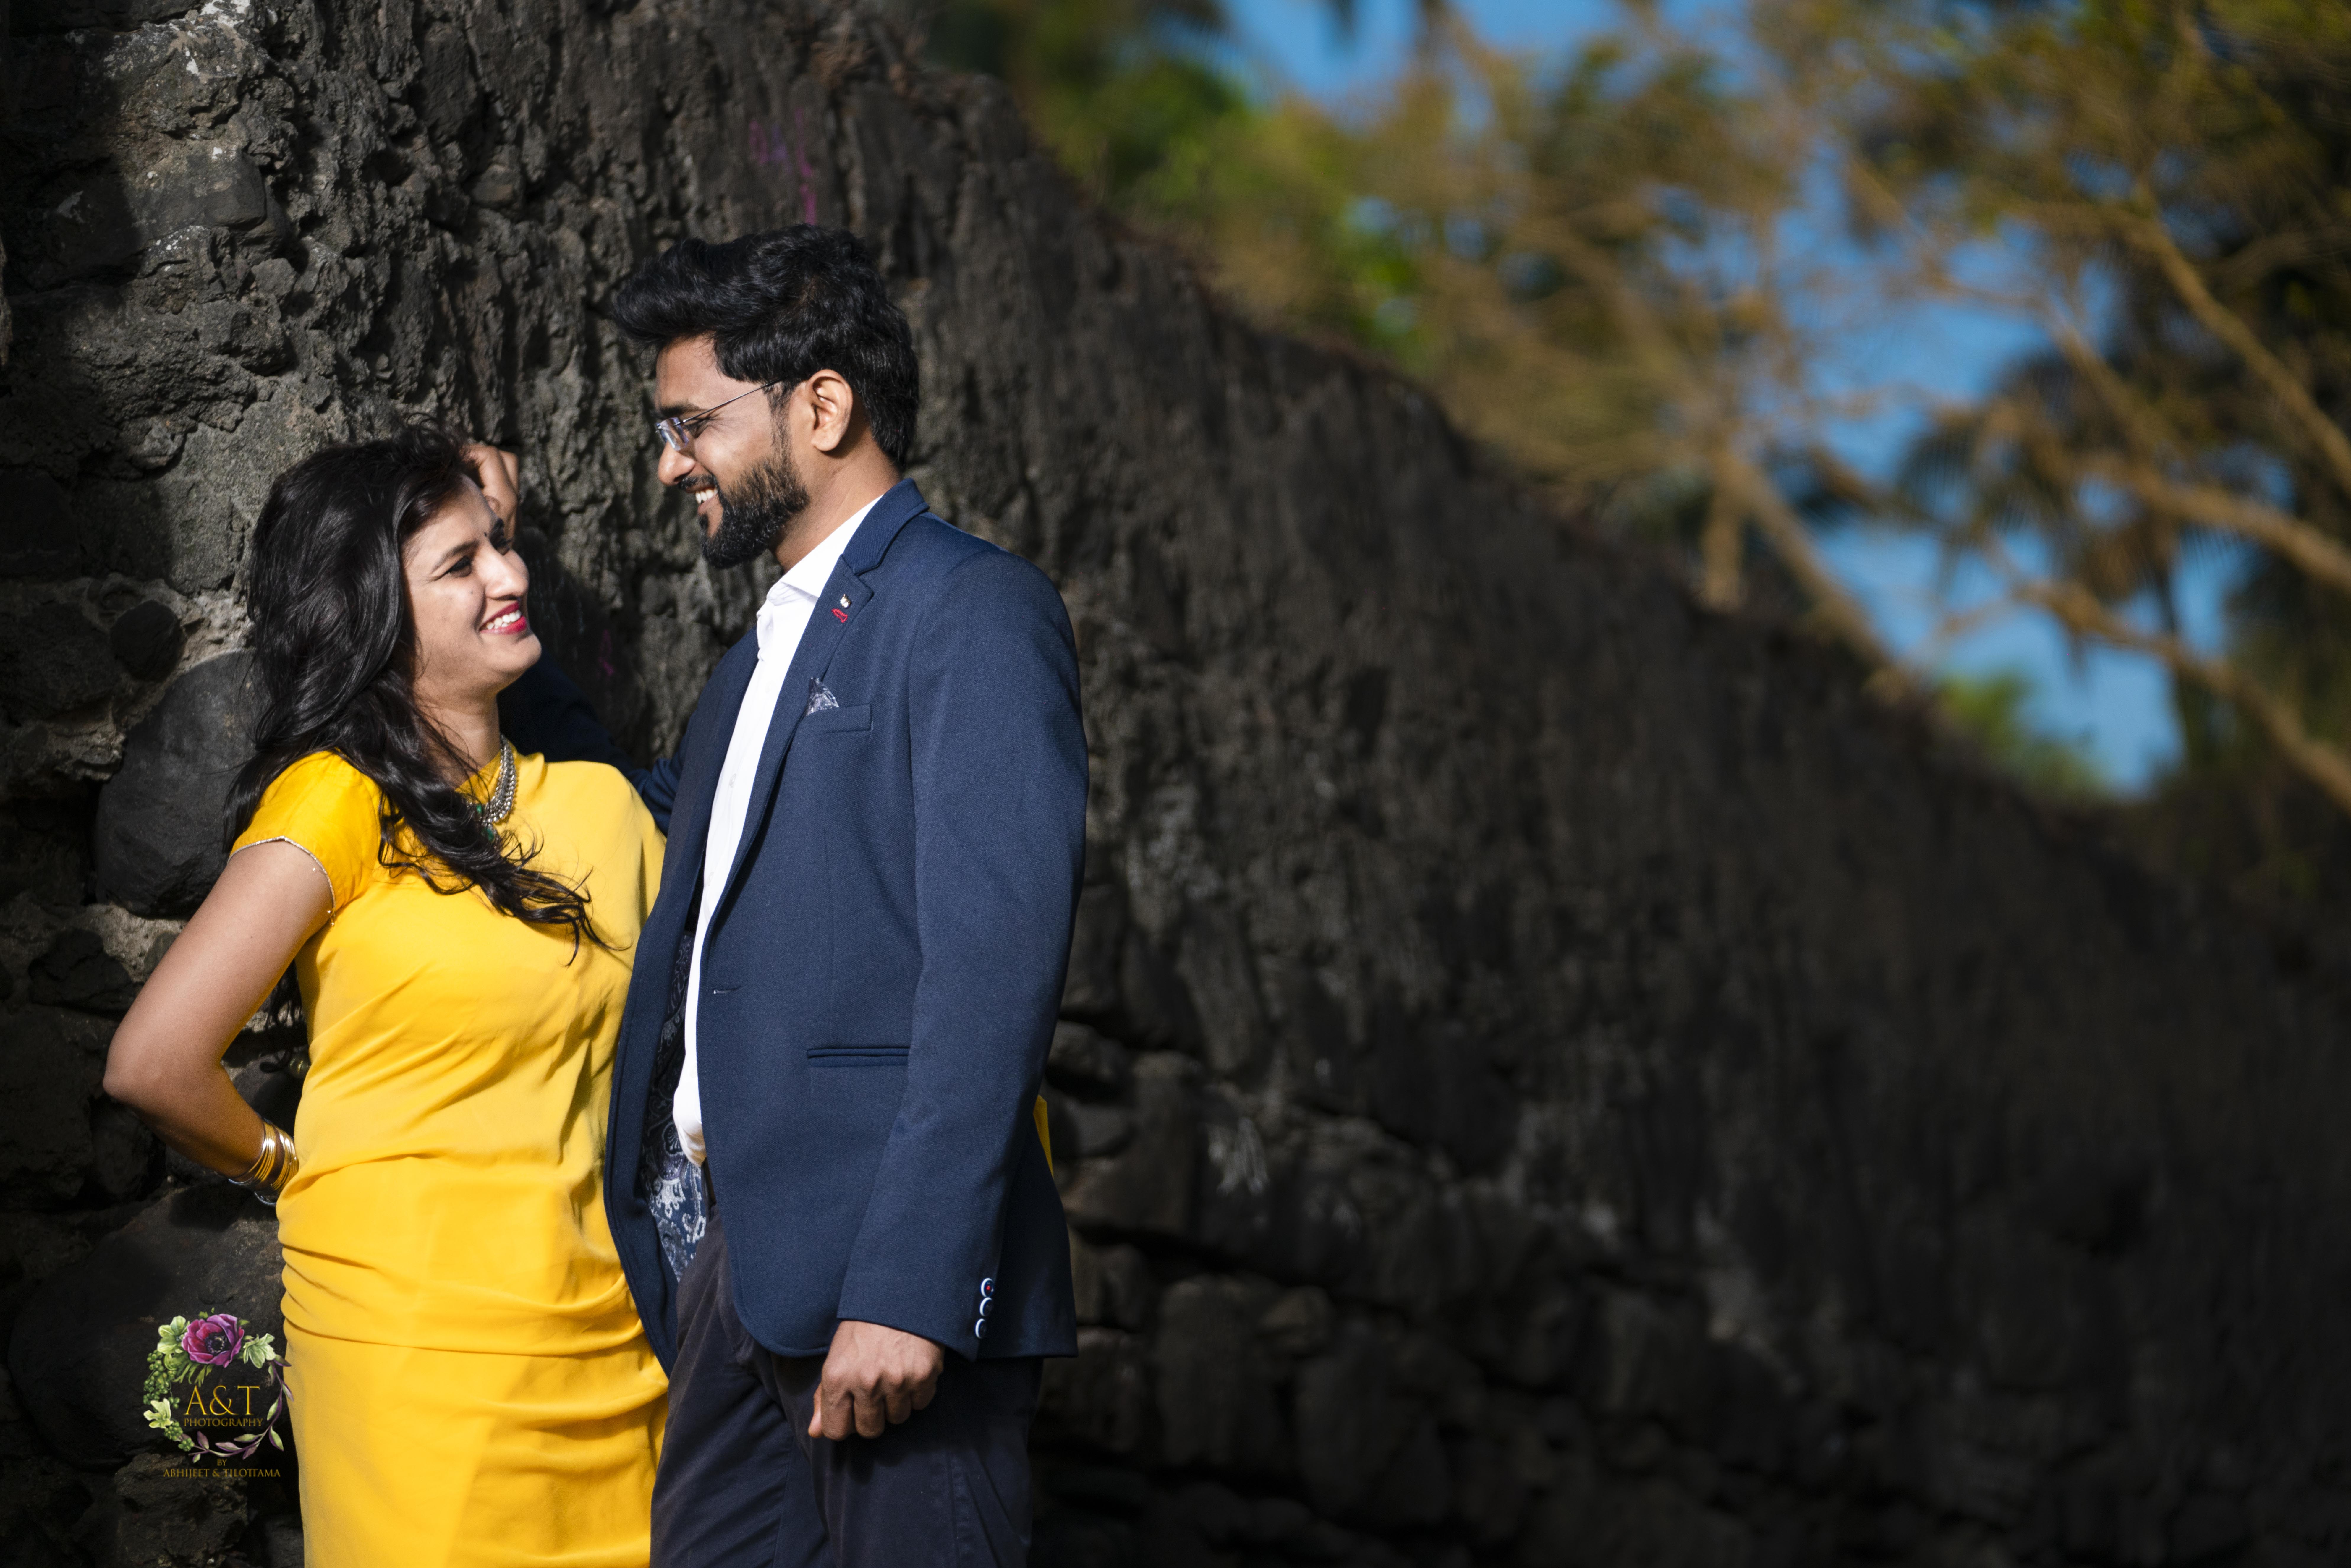 Romantic Pre-wedding Poses by best Wedding Photographer in Pune, India.